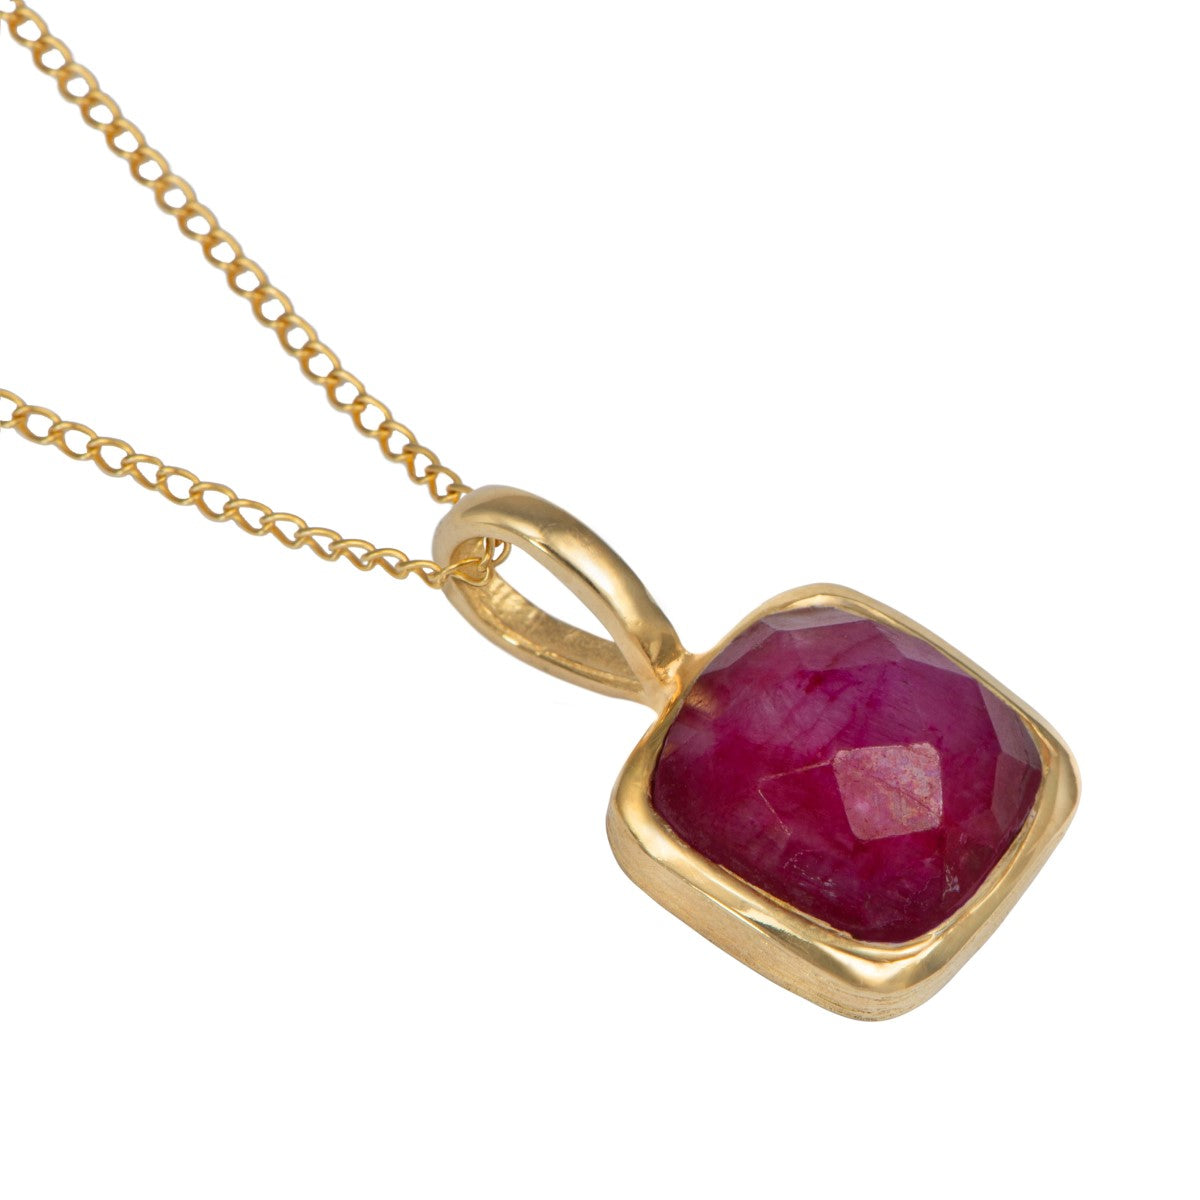 Gold Plated Sterling Silver Pendant Necklace with a Faceted Square Gemstone - Ruby Quartz